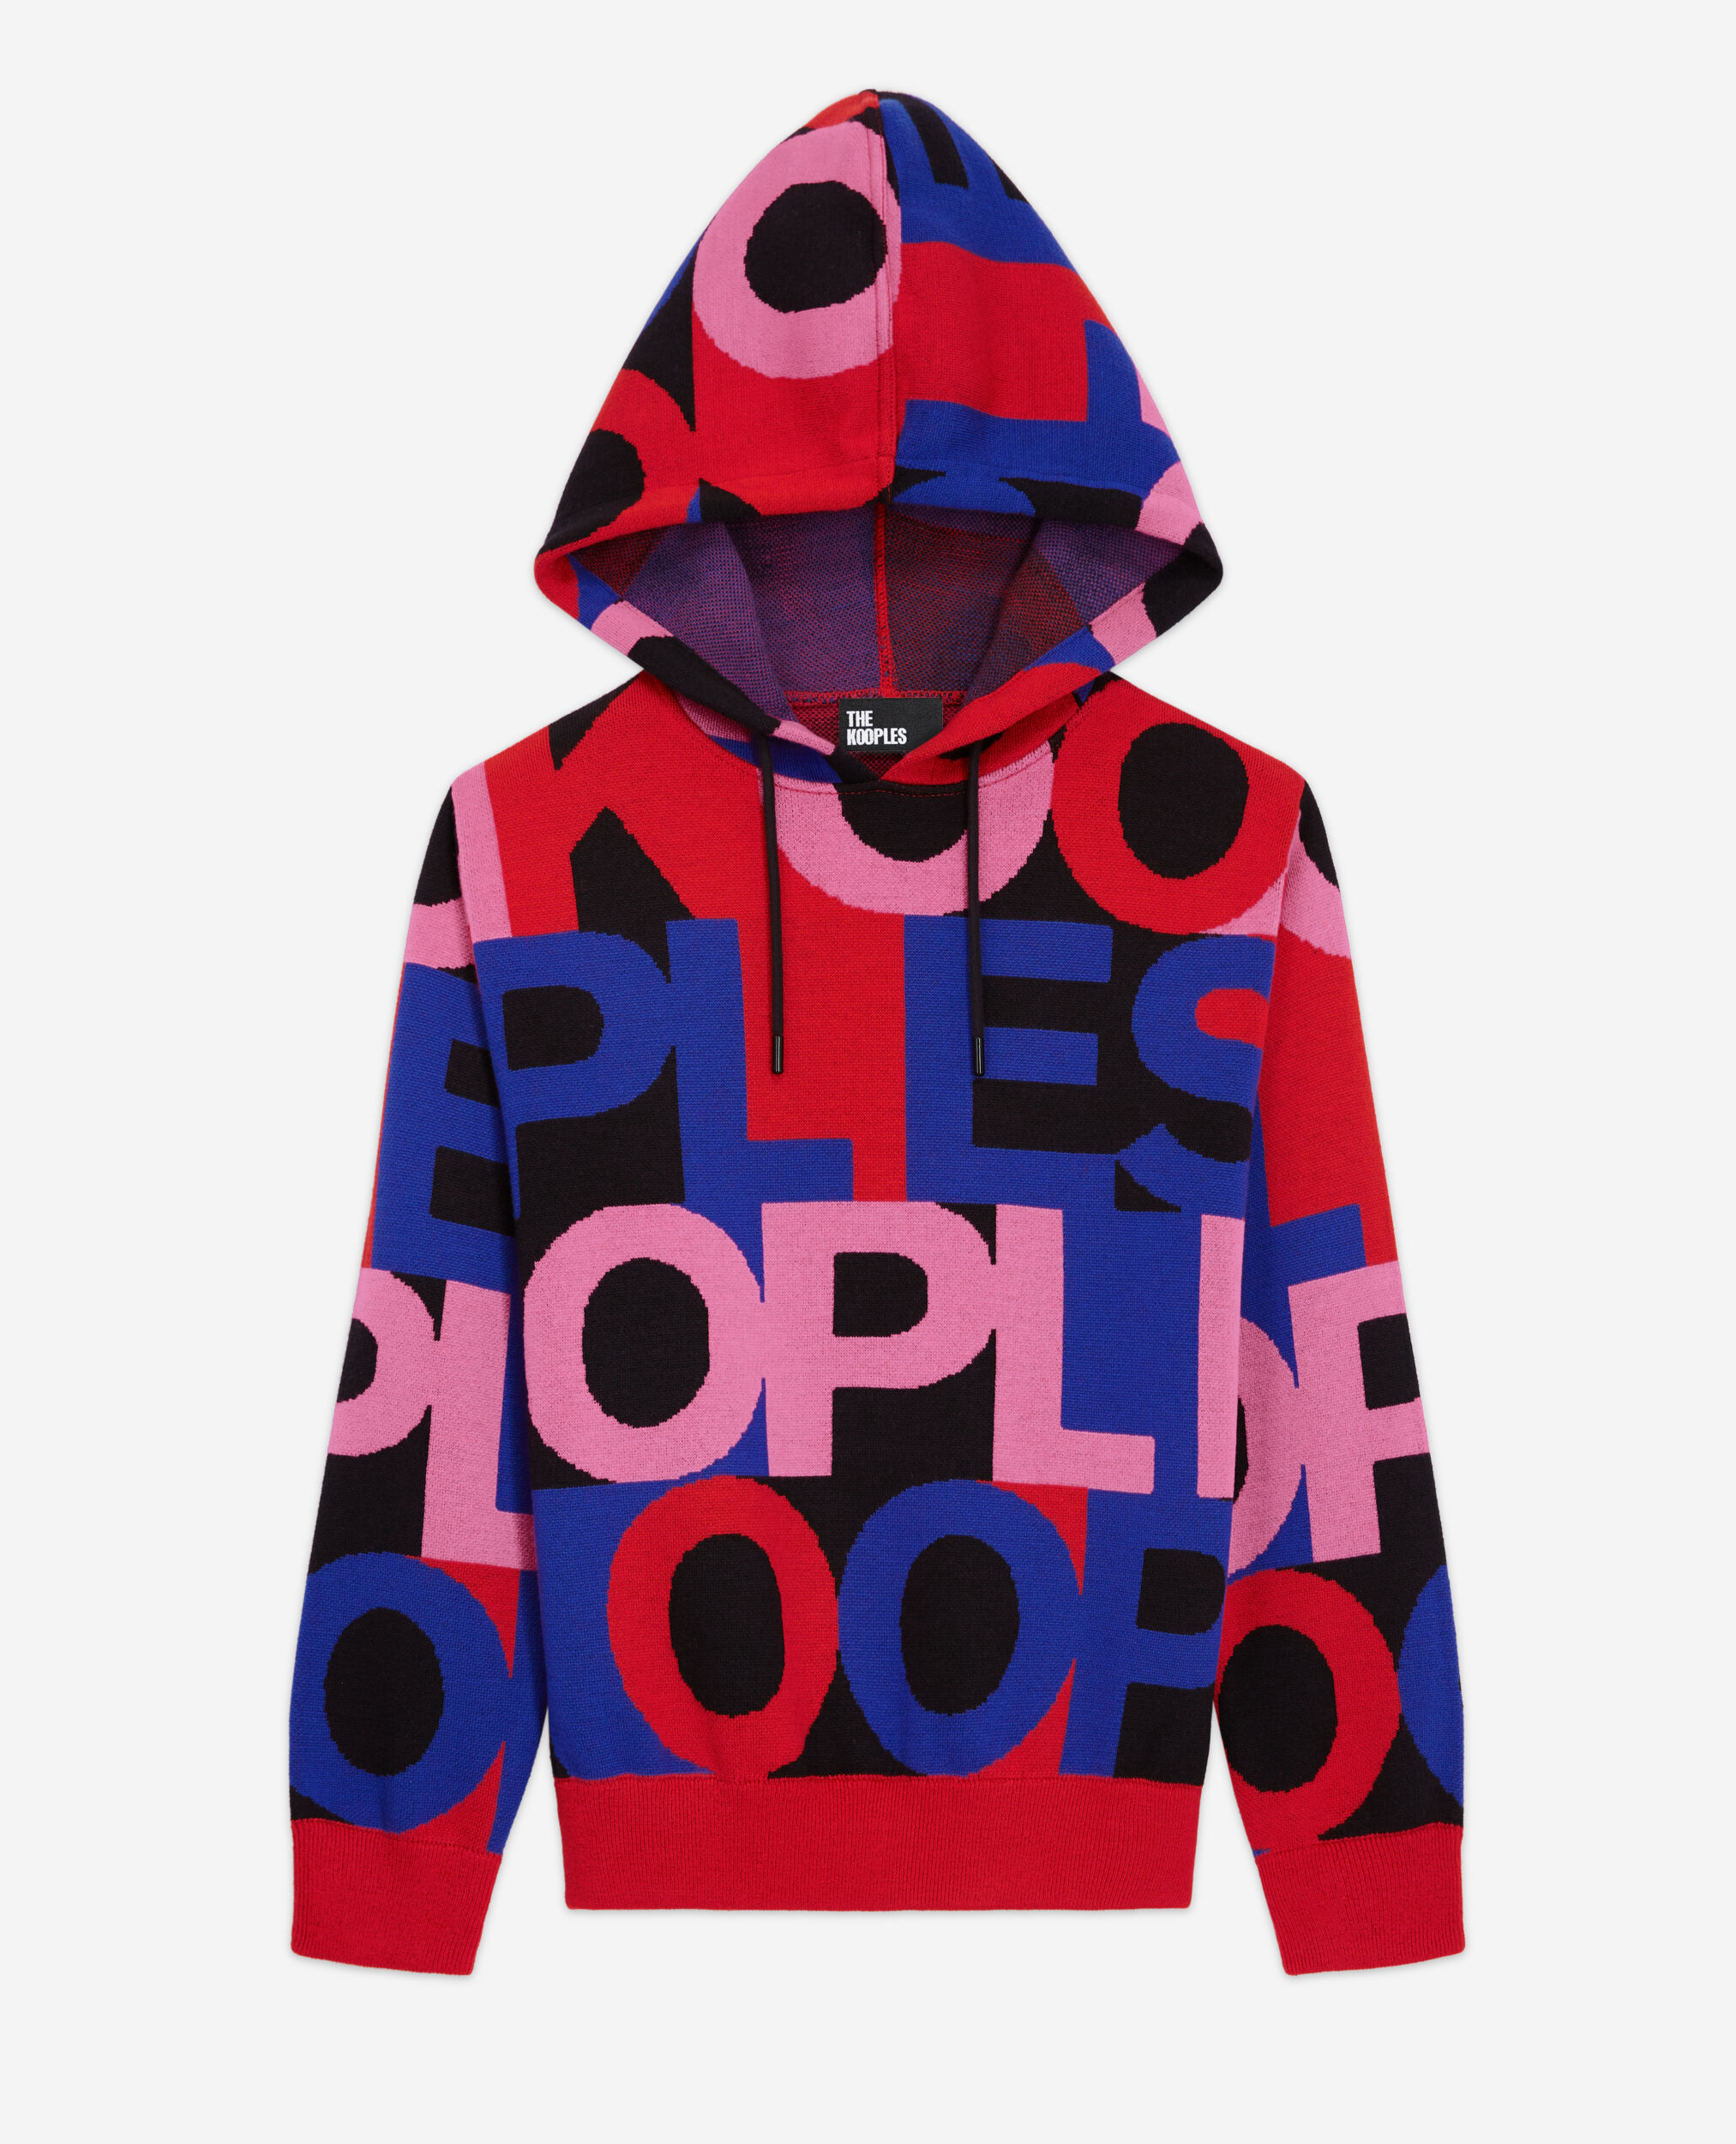 Pull mérinos logo The Kooples multicolore, MULTICOLOR, hi-res image number null